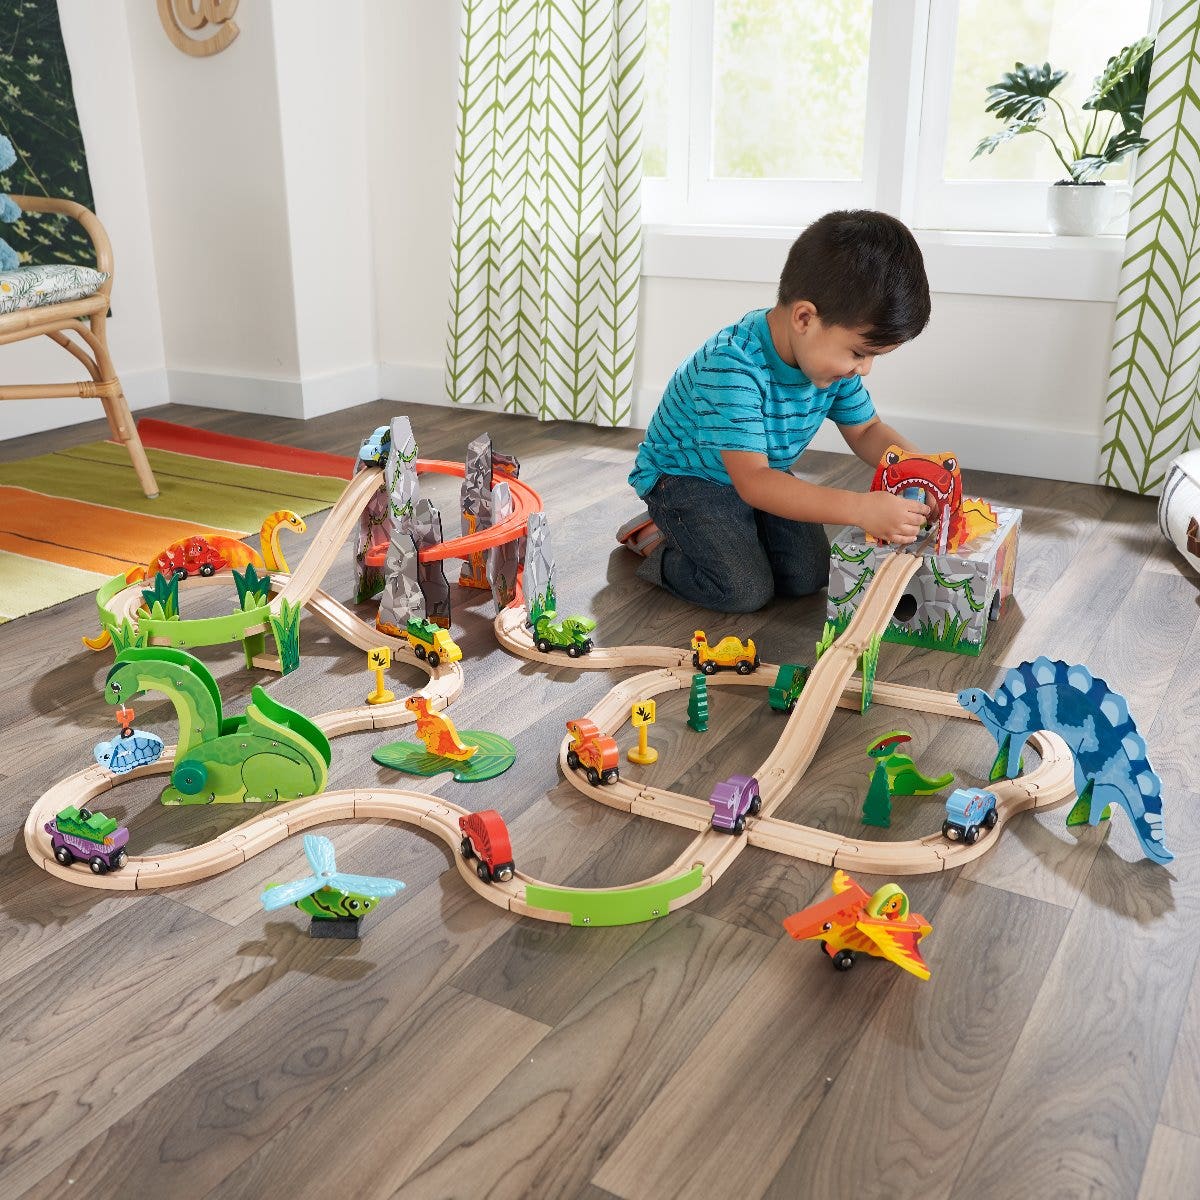 Kid playing with train set